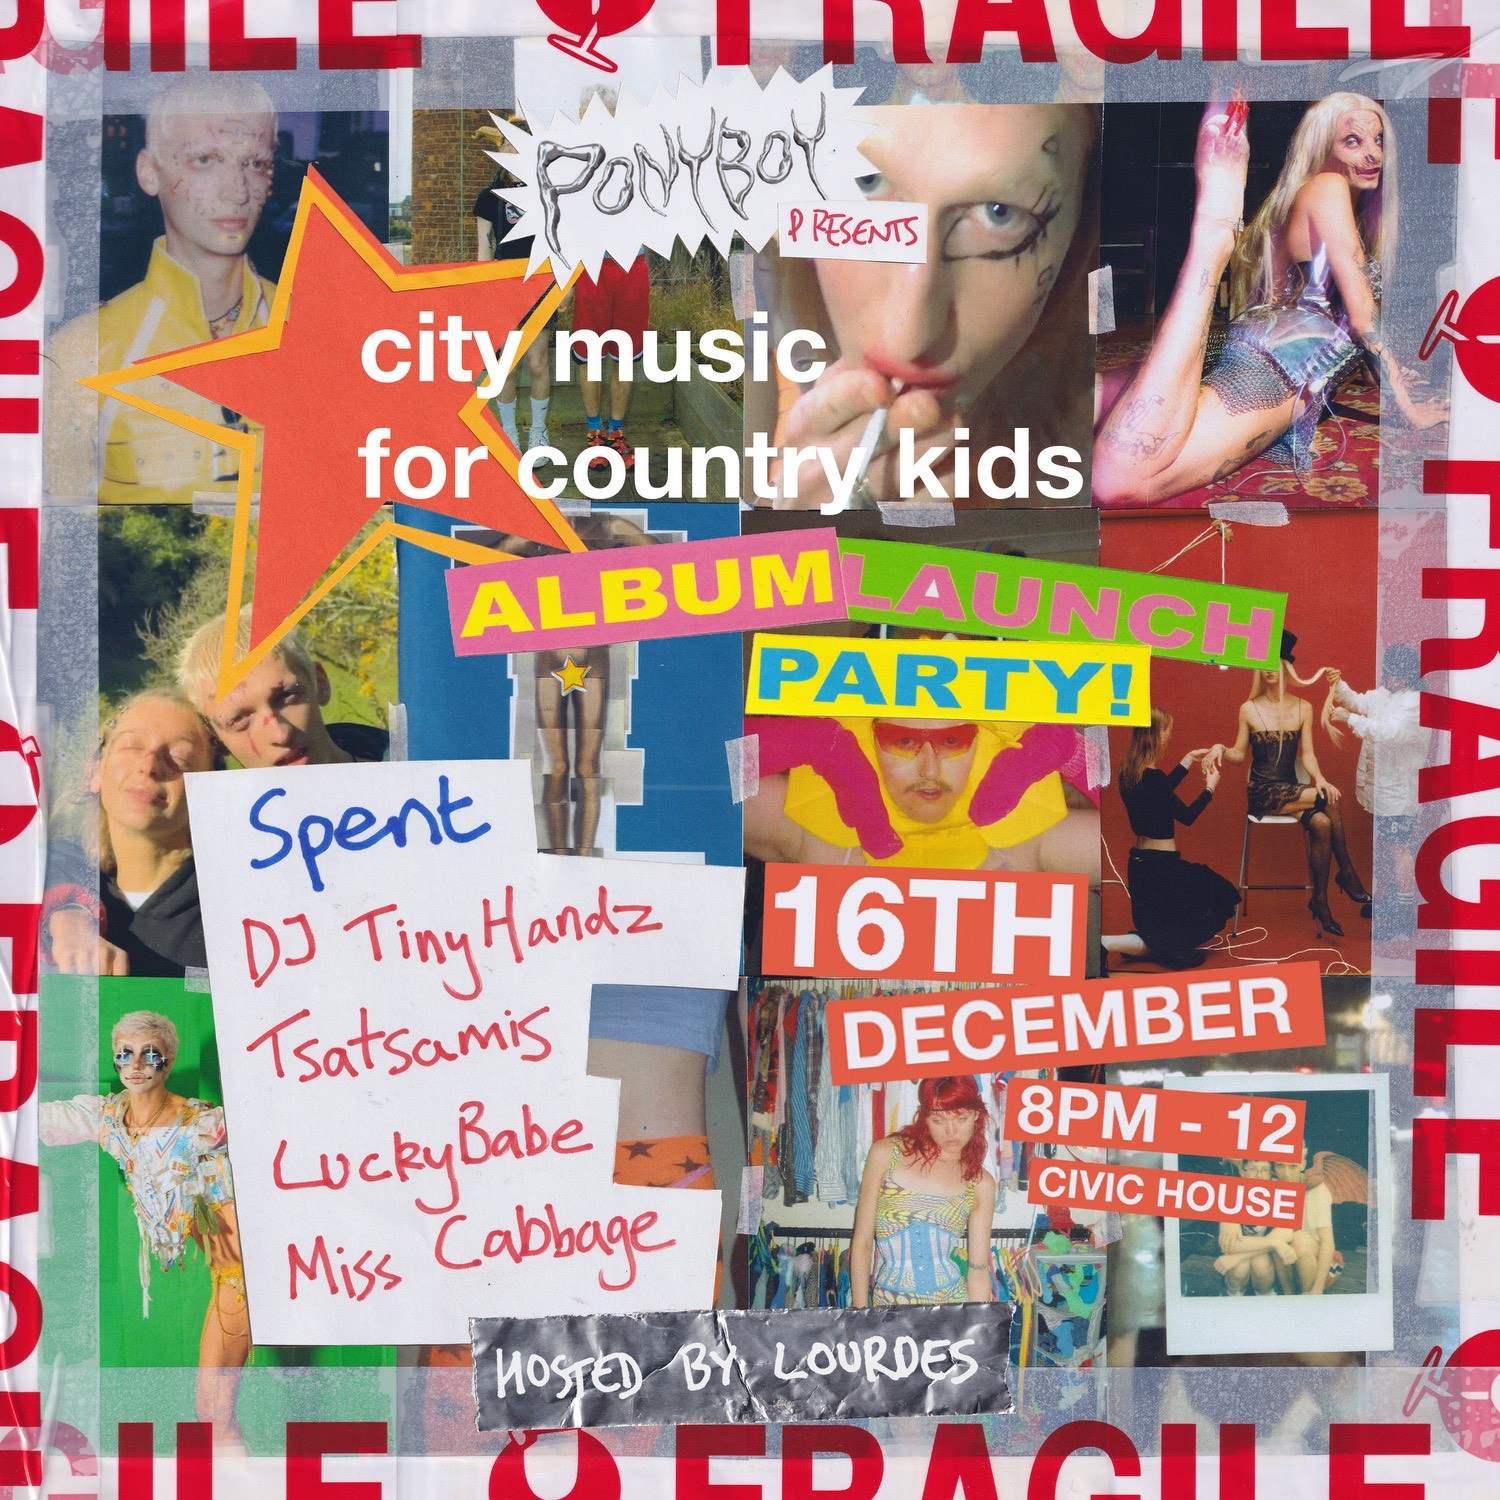 Ponyboy presents: City Music For Country Kids Album Launch Party - フライヤー表